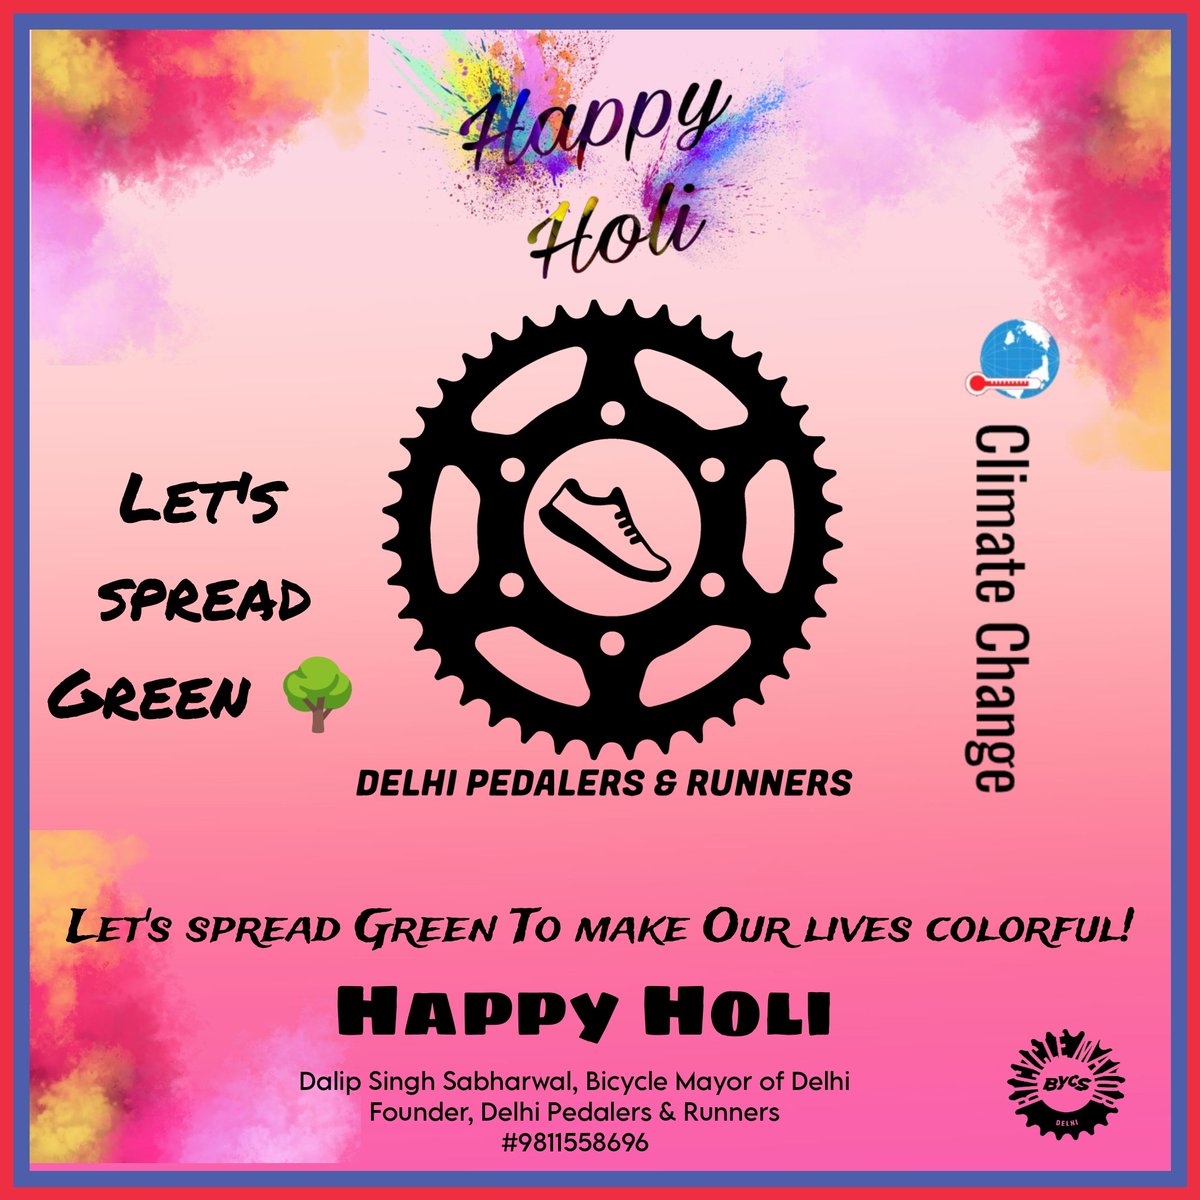 WISH YOU ALL A HAPPY HOLI !

Let's spread Green to make our lives colorful ✅ - @dalipsabharwal

#holi #delhipedalersandrunners #festival #celebration #bicyclemayordelhi #delhi #colors #holiday #cycletocommute #spreadgreen #climatechange #beonecarless #stayfit #fitindia